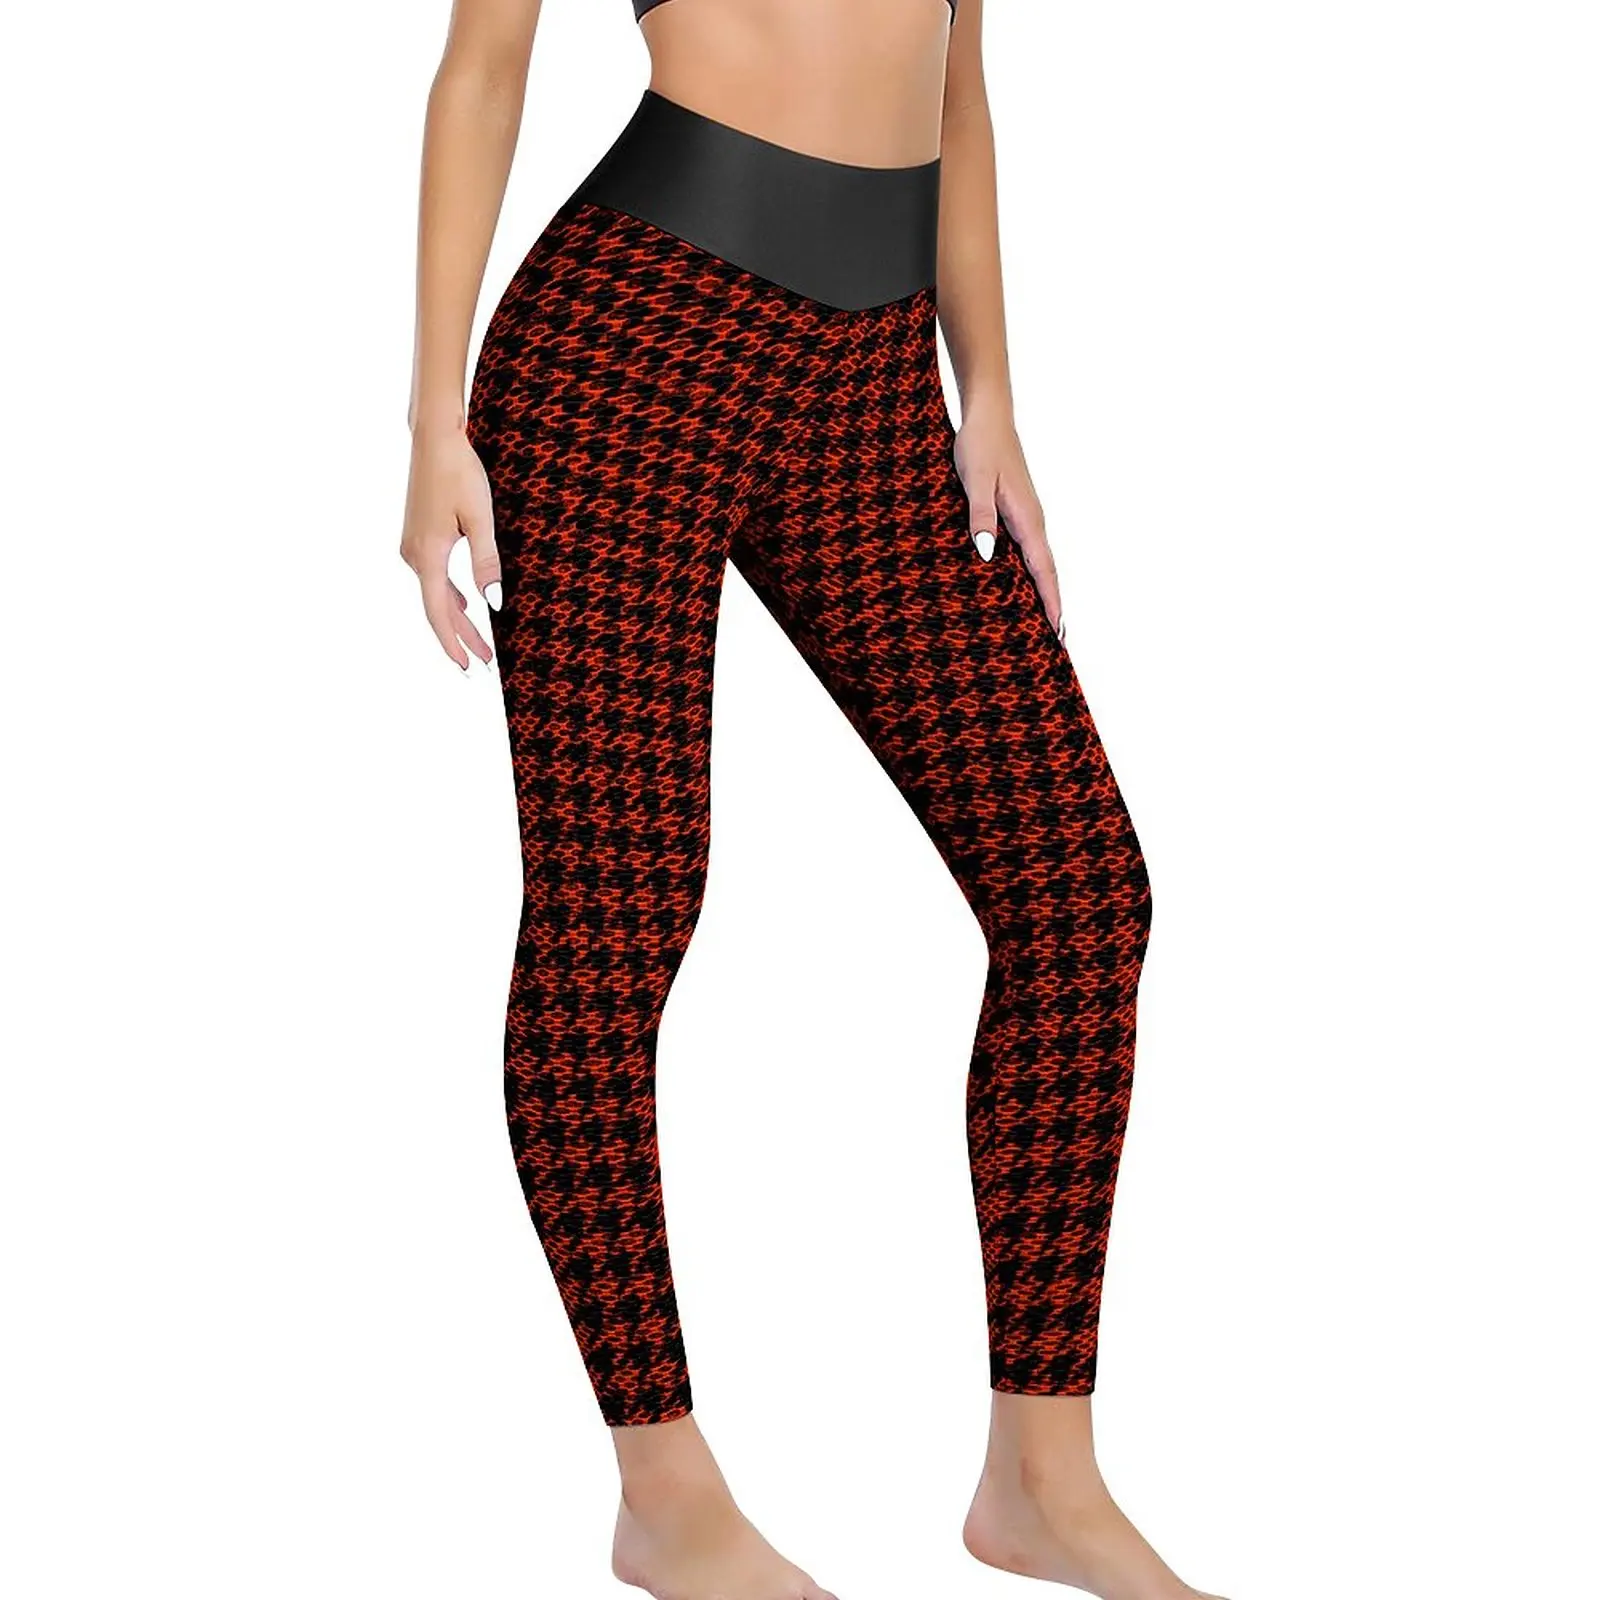 

Black Red Houndstooth Yoga Pants Sexy Vintage Print Leggings High Waist Fitness Leggins Women Cute Quick-Dry Sports Tights